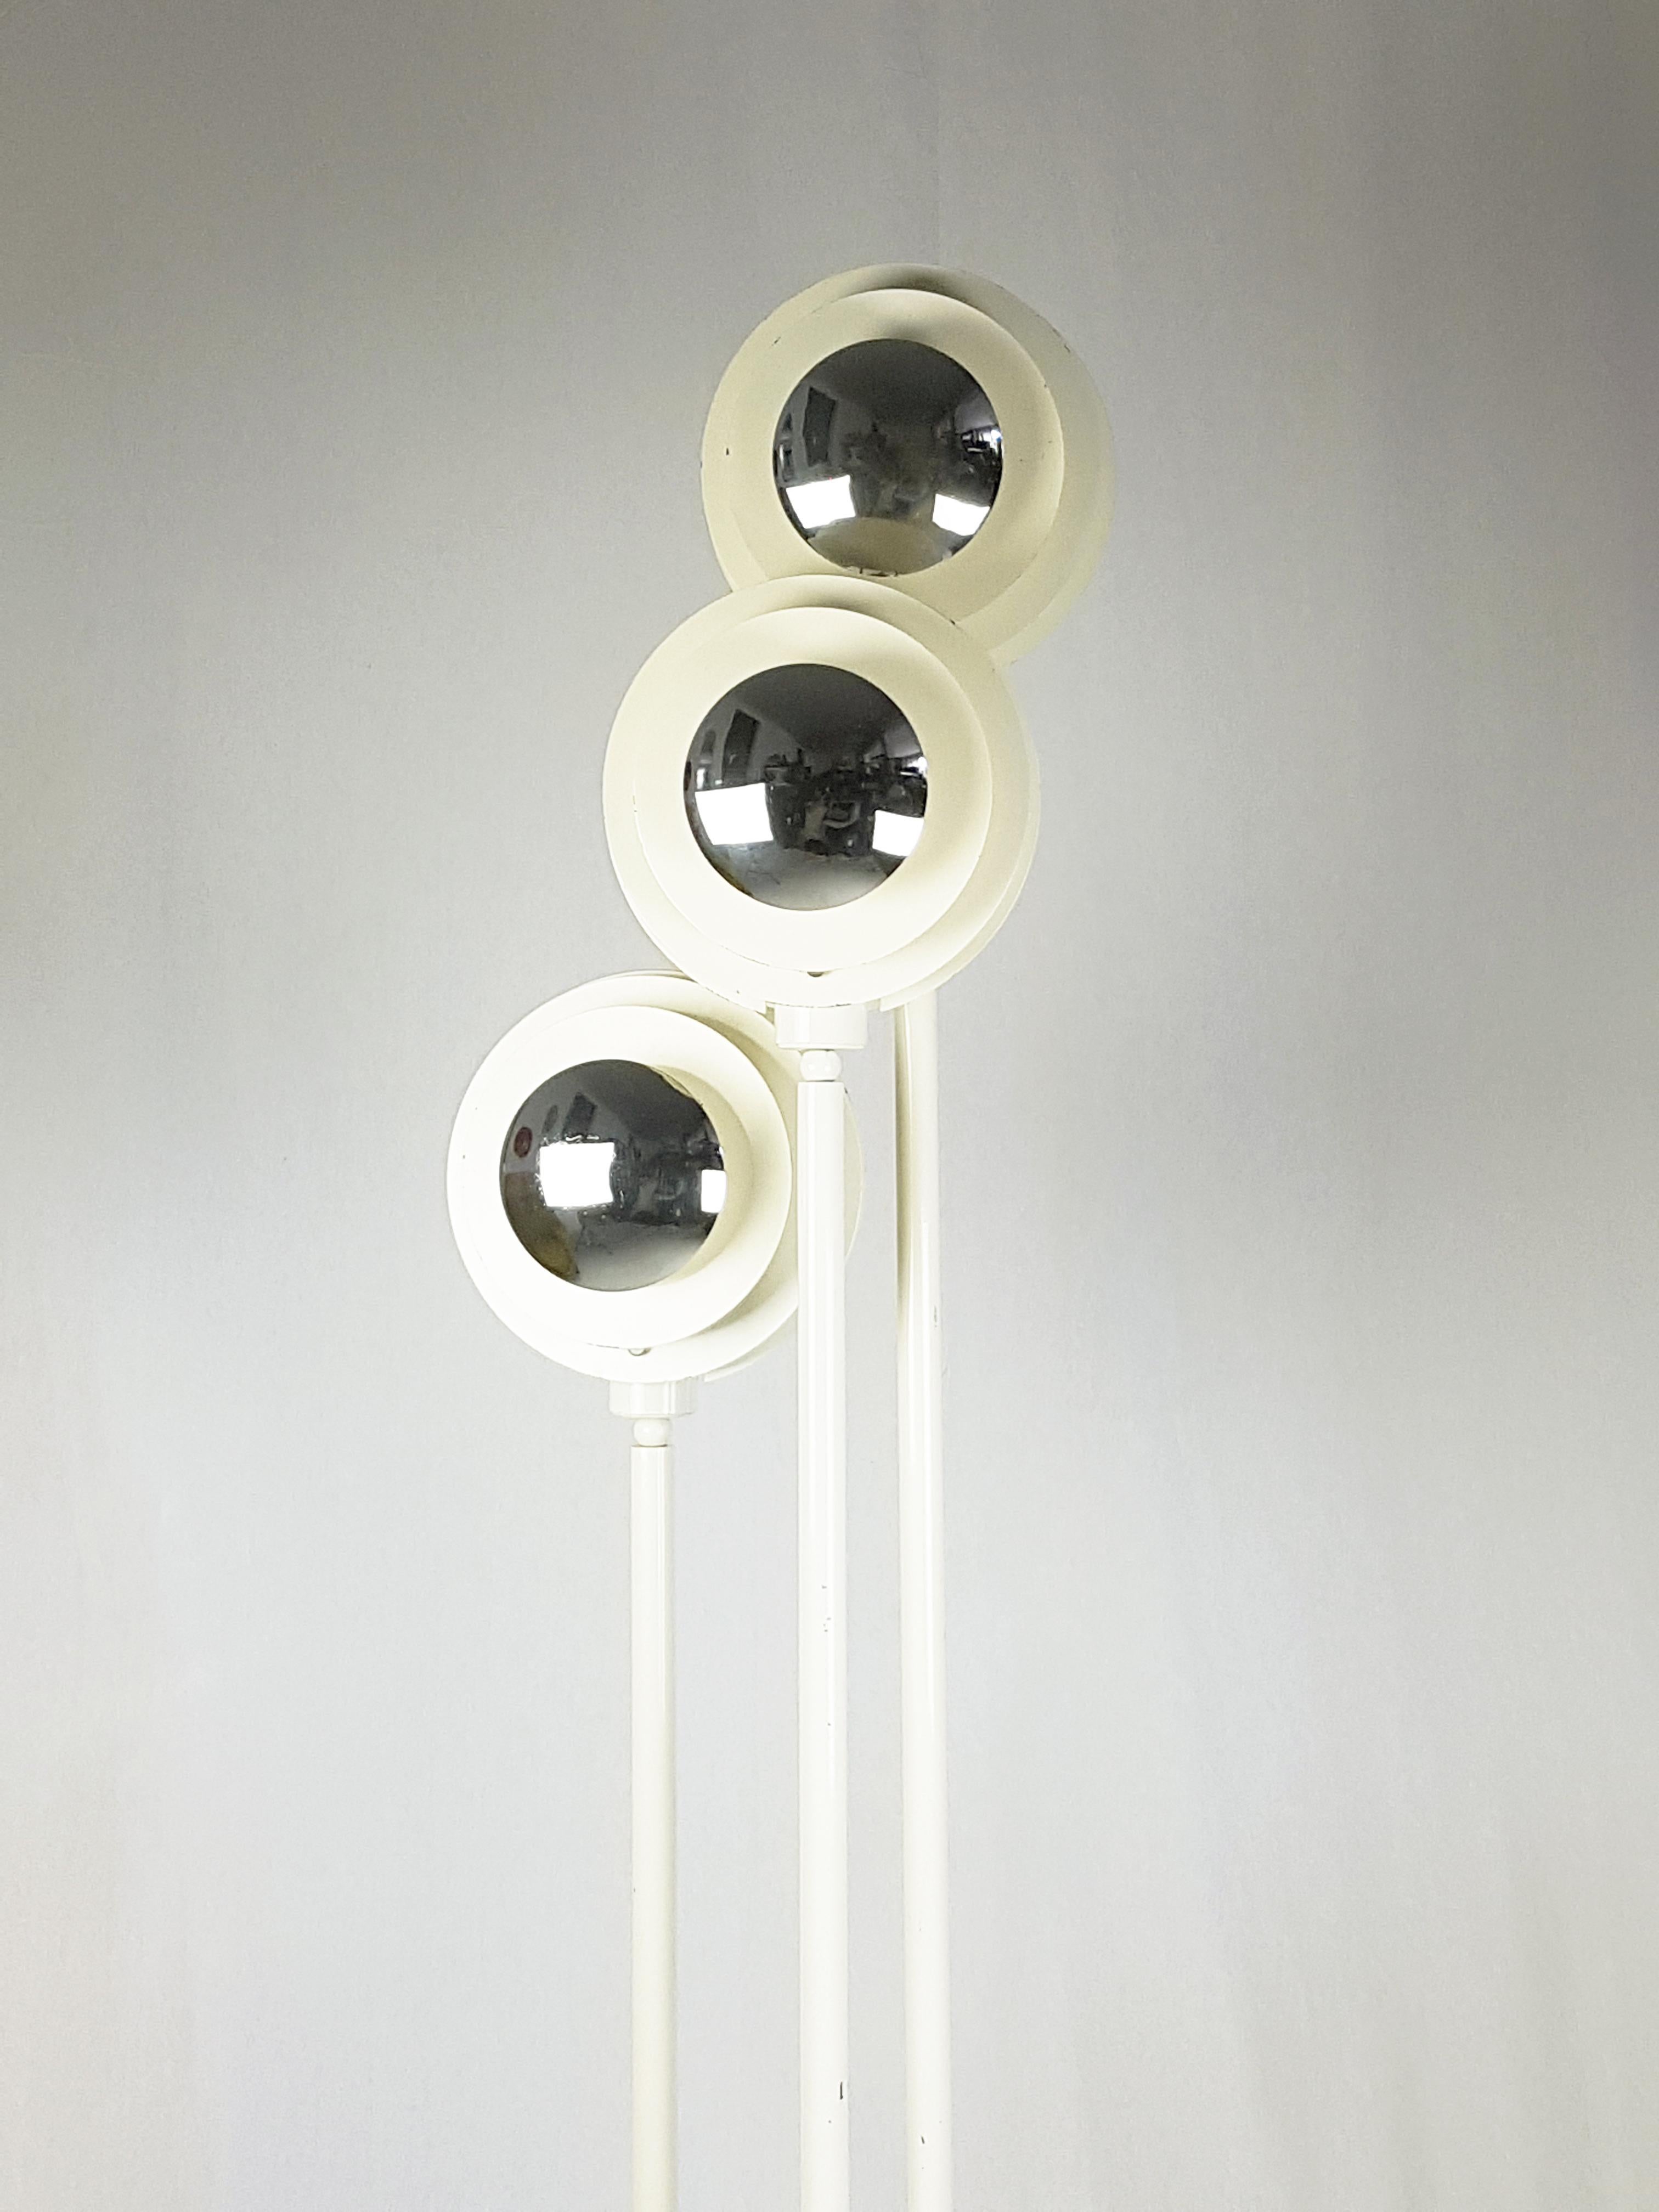 Floor lamp made in Italy from the Space Age era. The lamp is equipped with 3 lampshades positioned at different heights.
Good condition: visible paint losses and signs of slight oxidation, as shown in the photos.